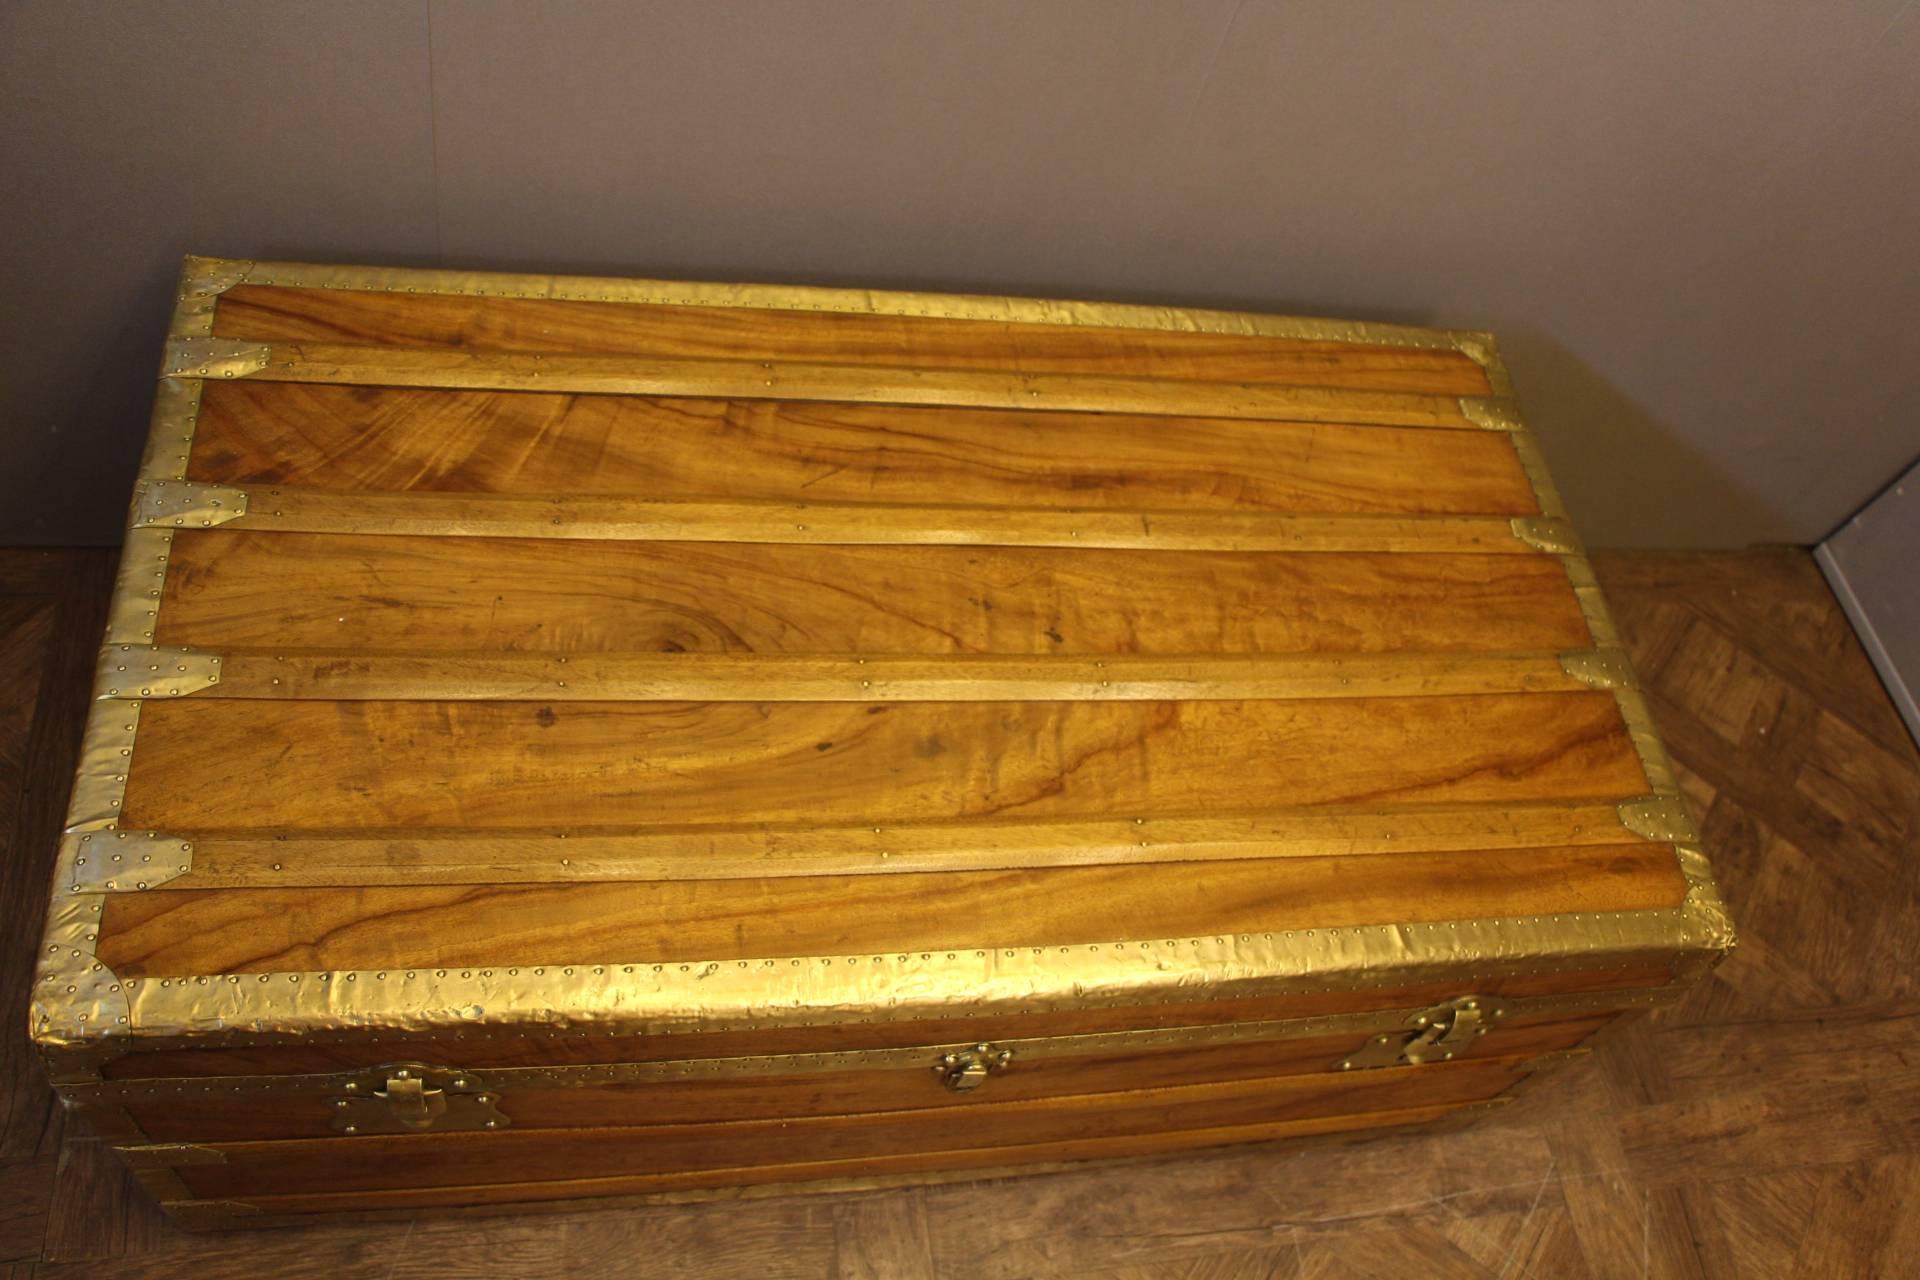 It is a very unusual camphor wood trunk with brass trim, locks and side handles. It has a very warm patina. It is top quality and very chic.
Its interior is perfectly clean and can be used for storage.
Obviously, the smell of camphor is still very